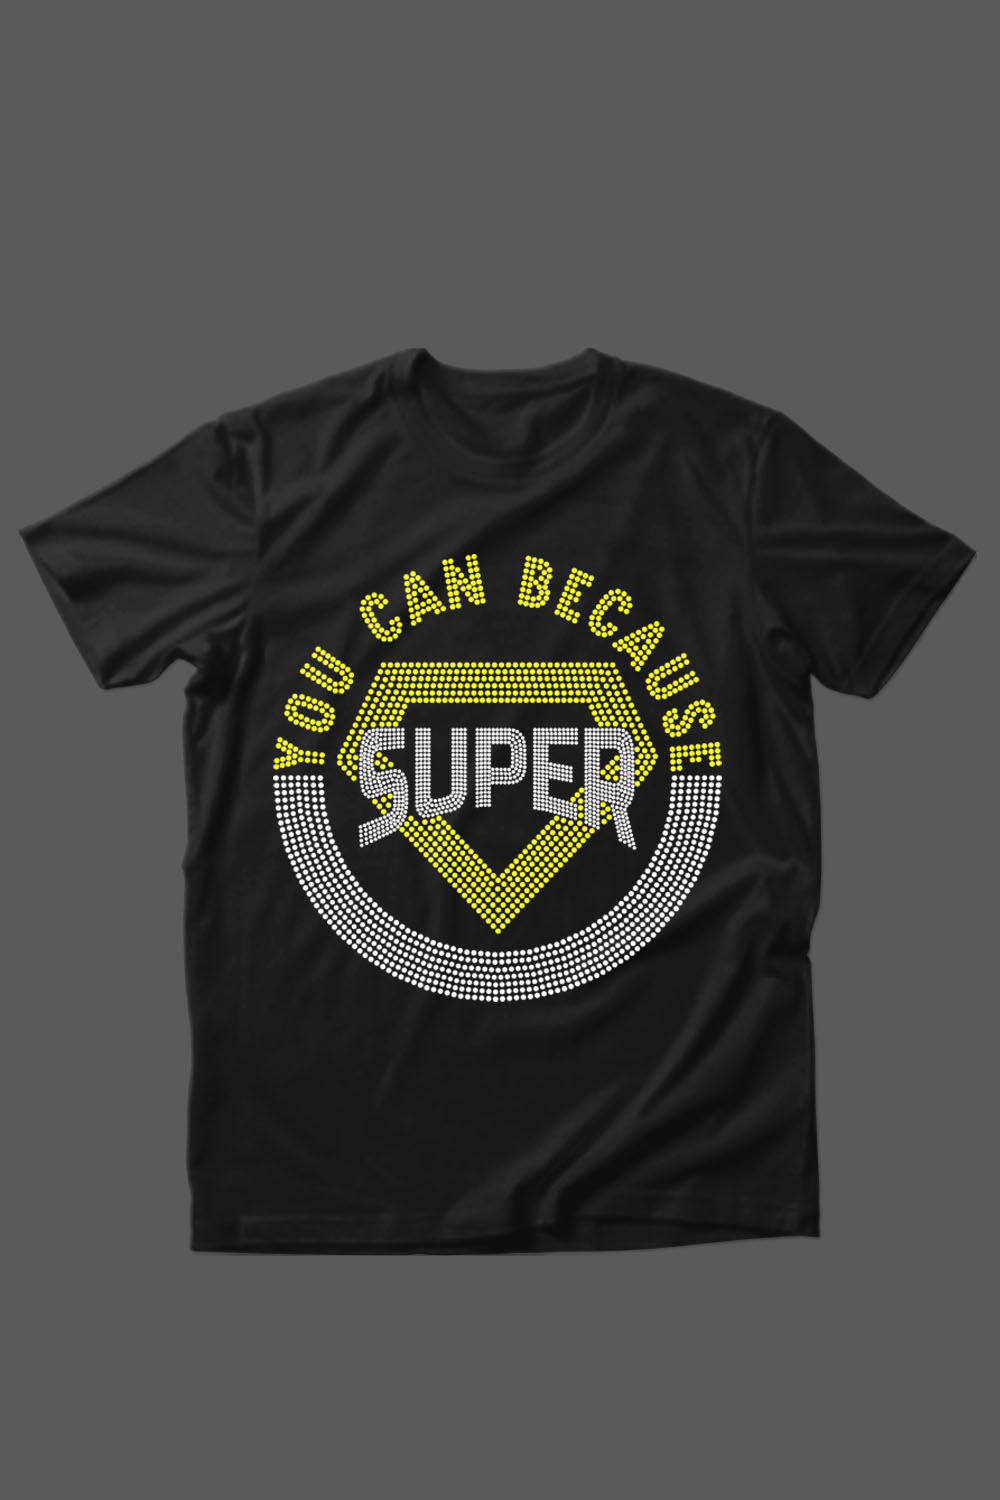 Image of a black t-shirt with the amazing You Can Because Super slogan